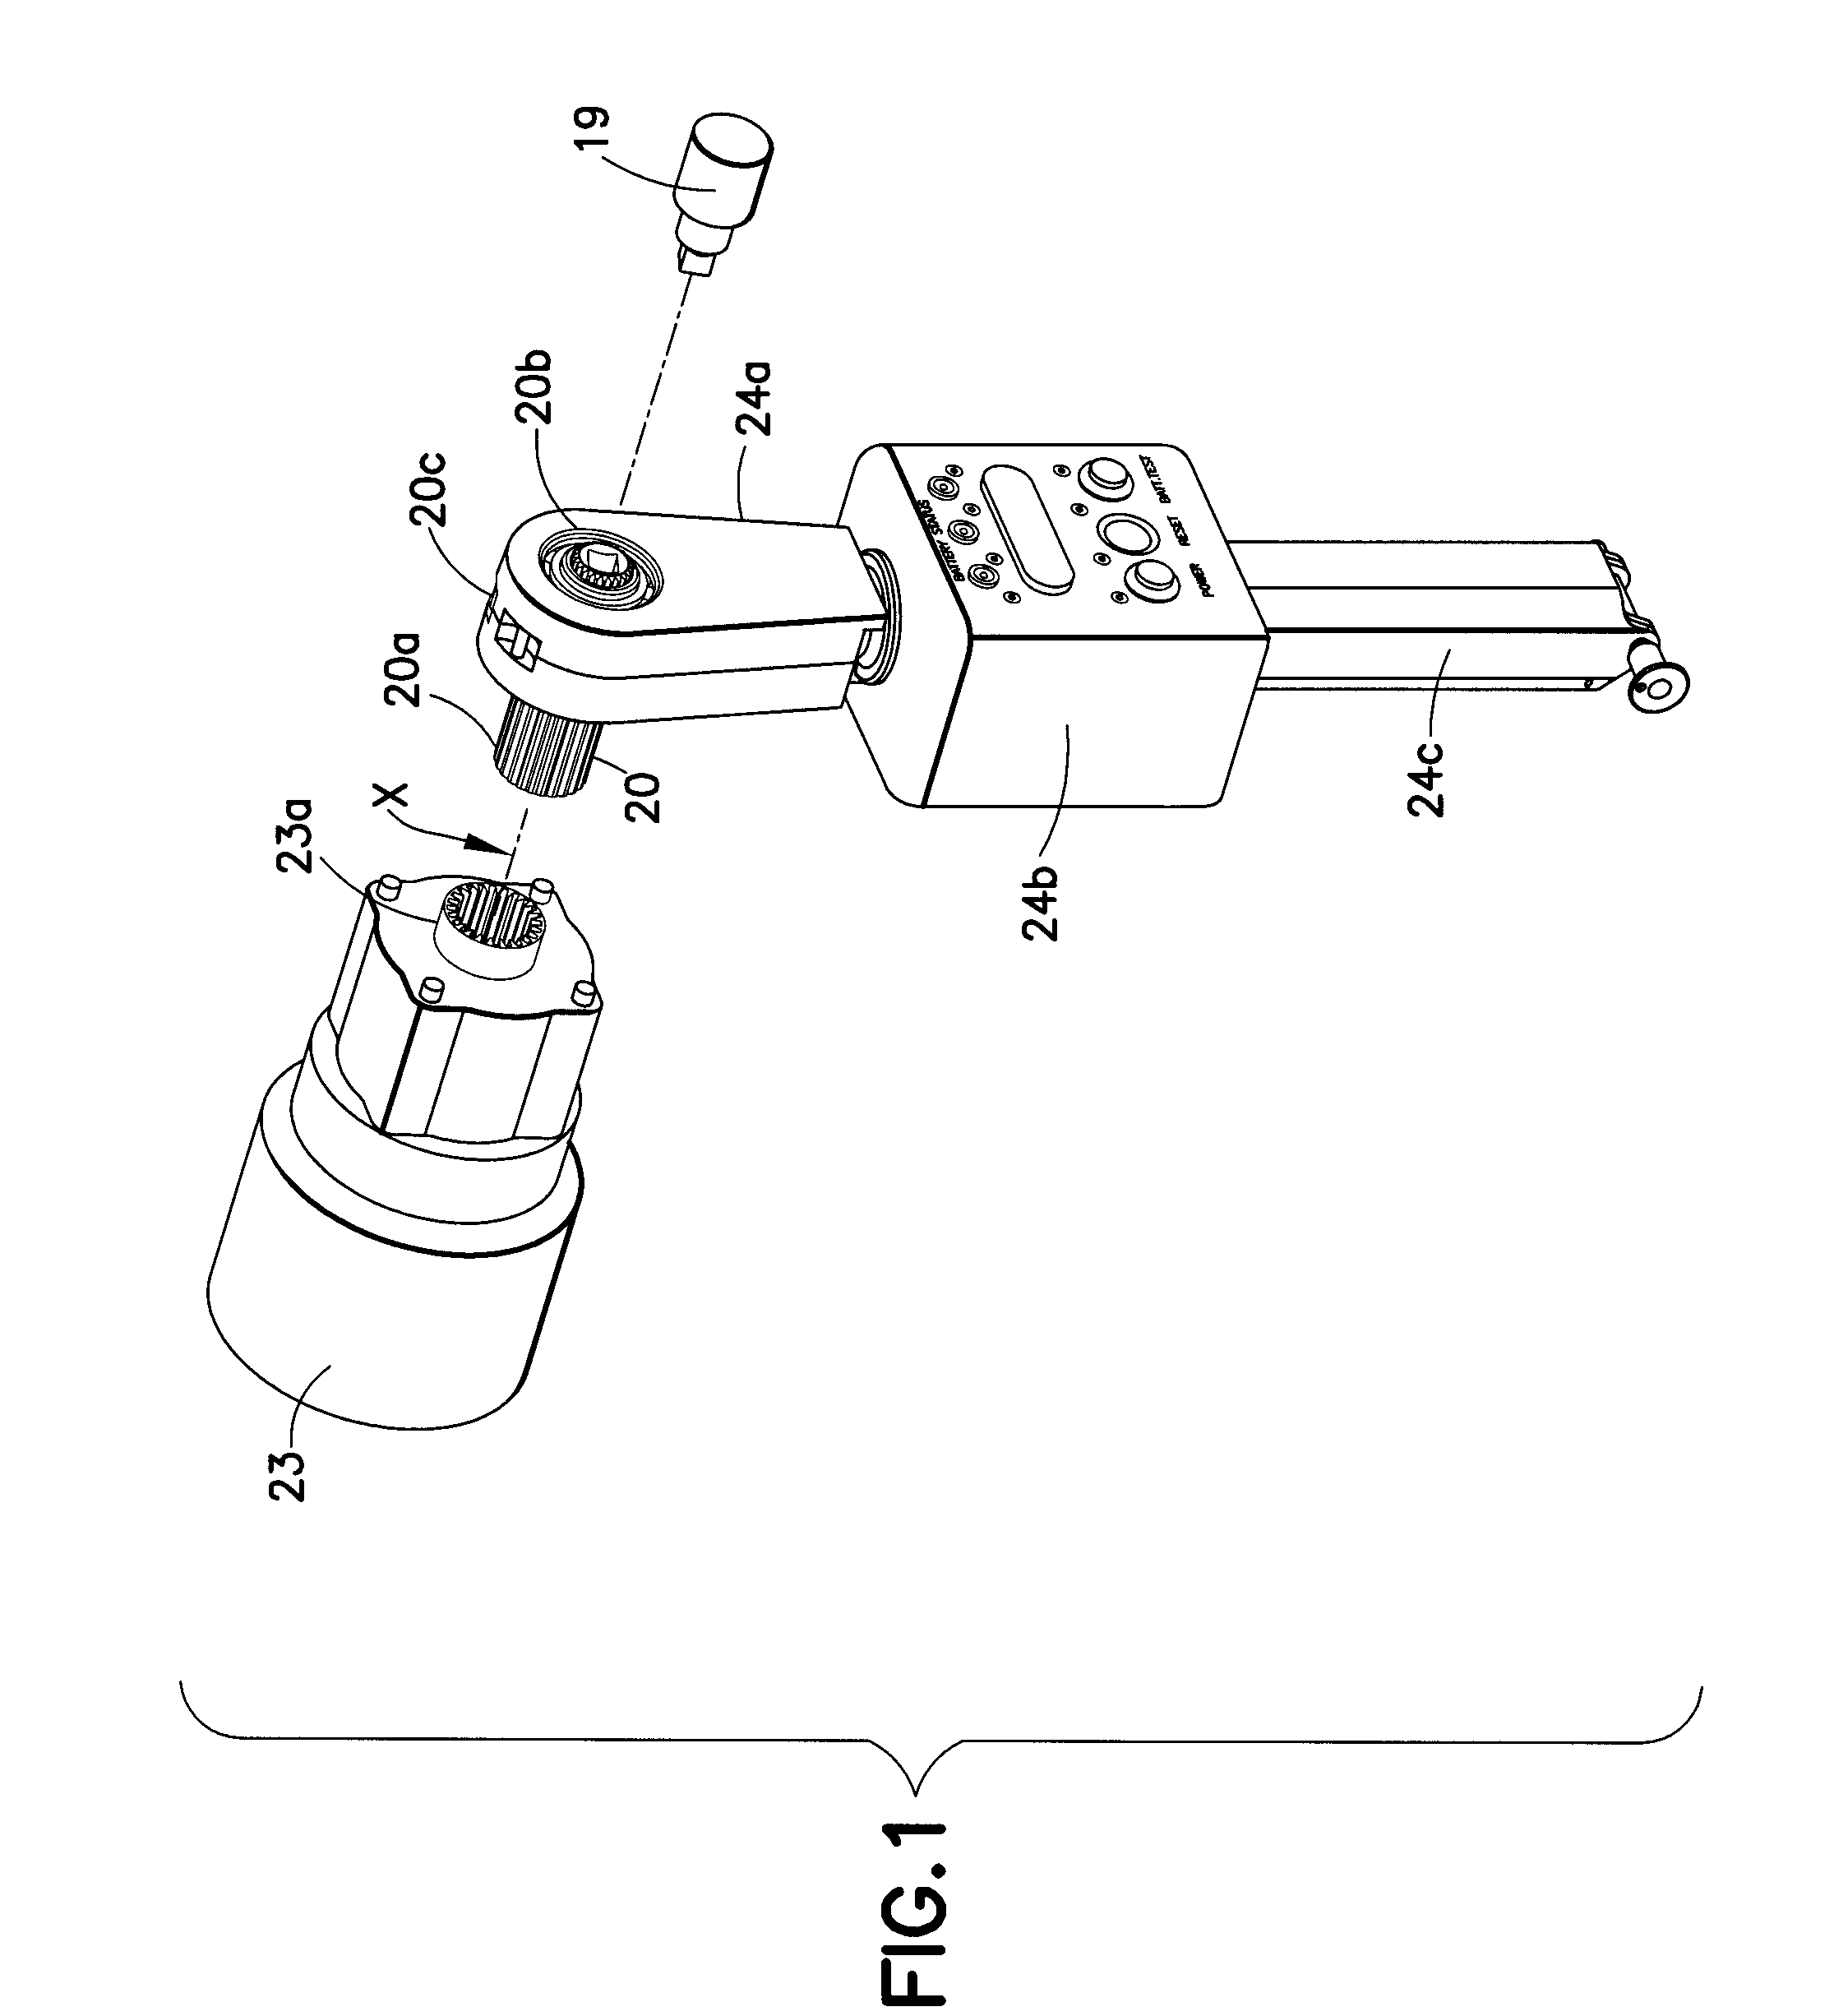 Revolution counter for turning assemblies